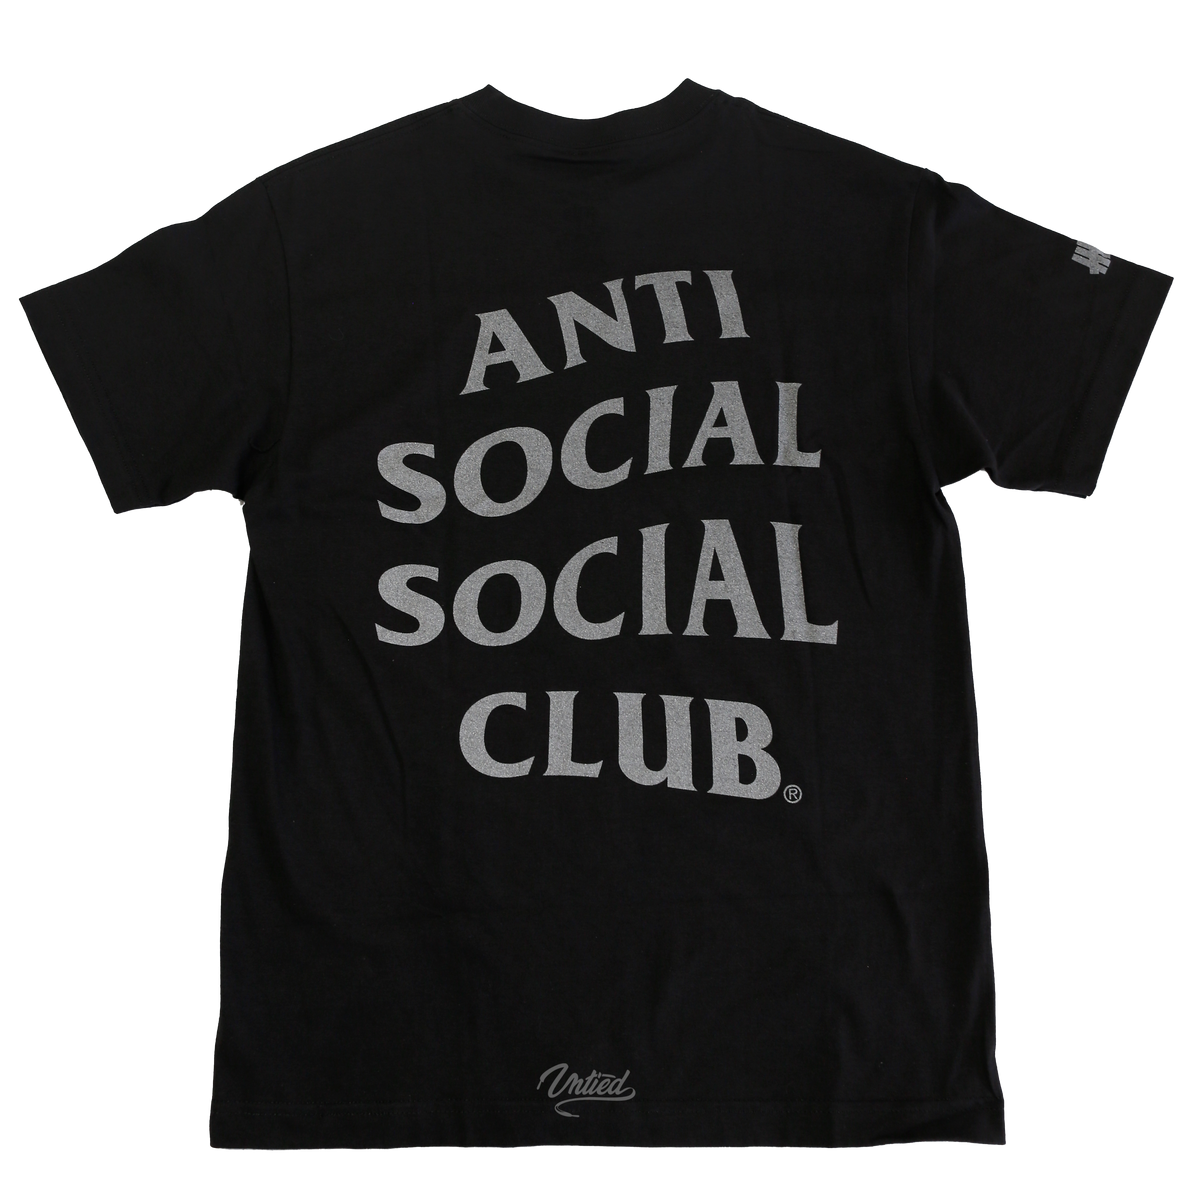 ASSC x Undefeated Paranoid Tee "Black 3M Reflective"